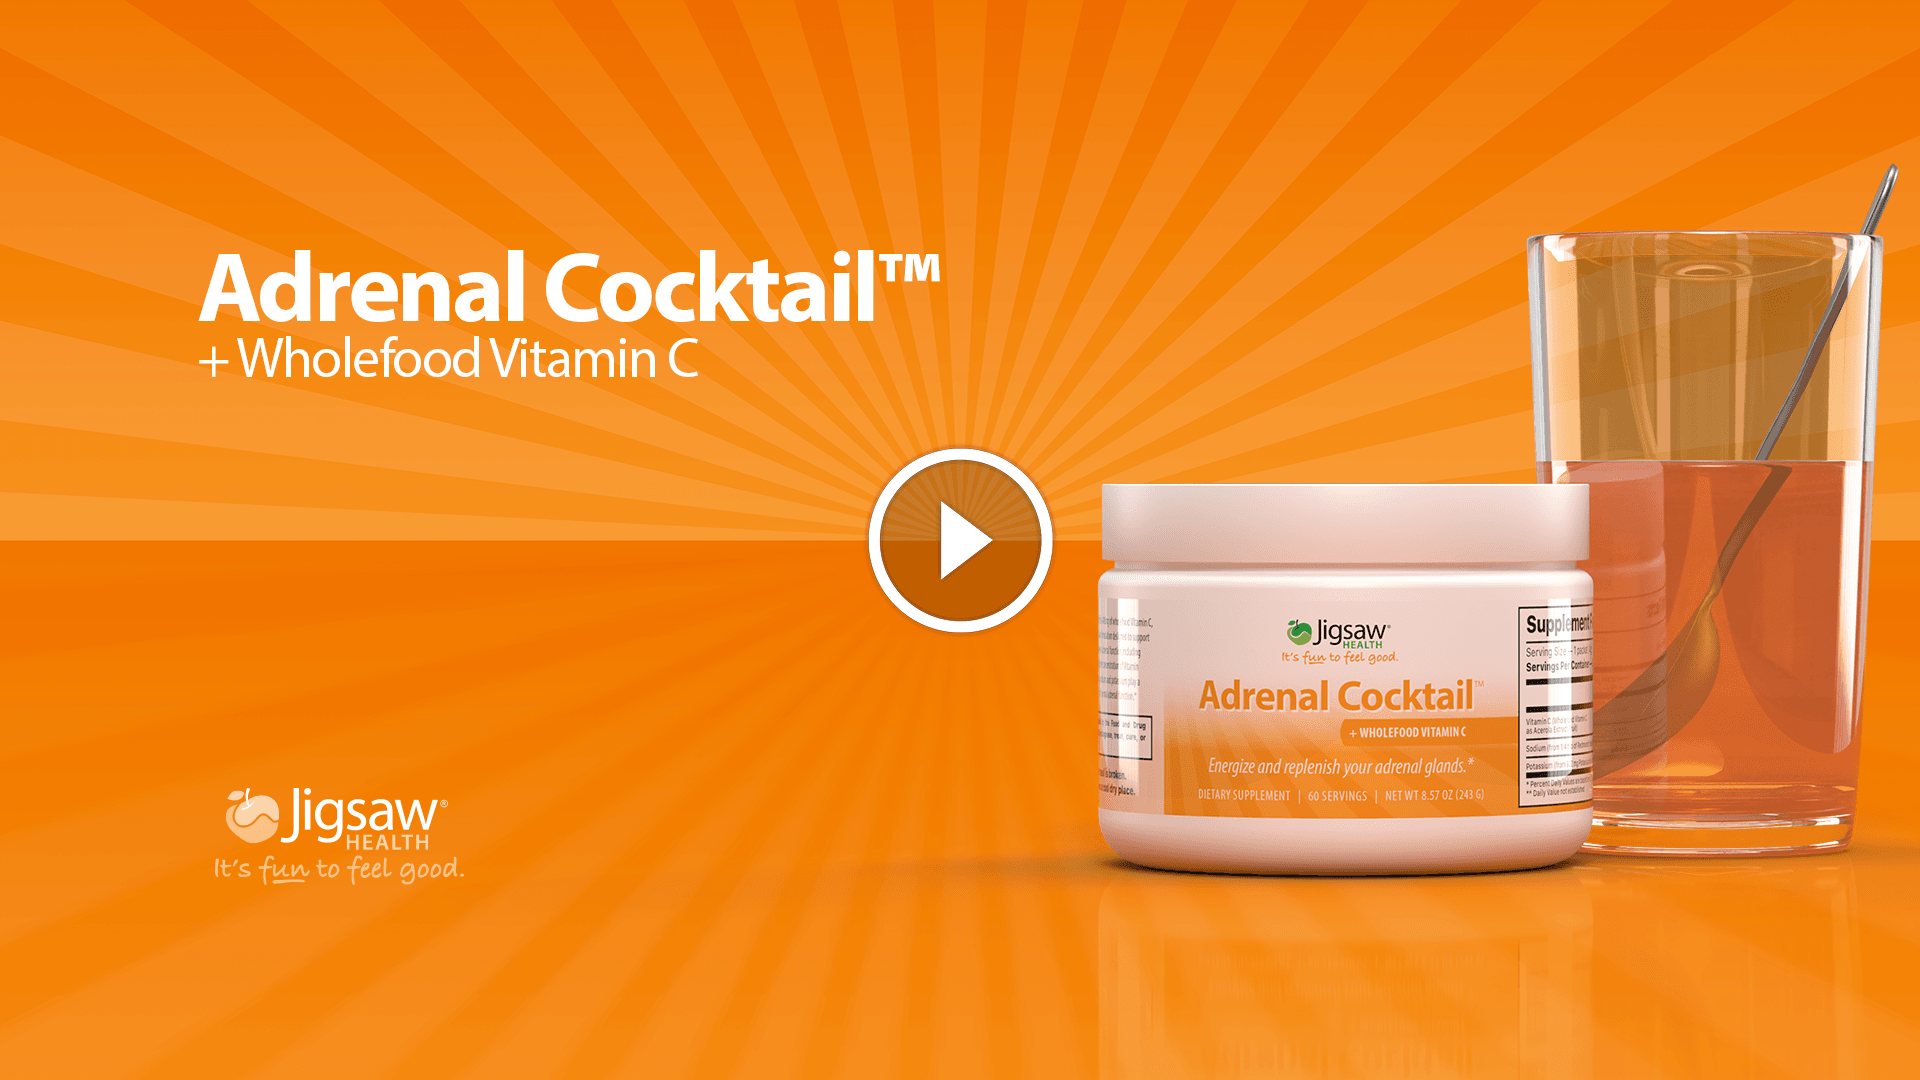 Adrenal Cocktail by Jigsaw Health